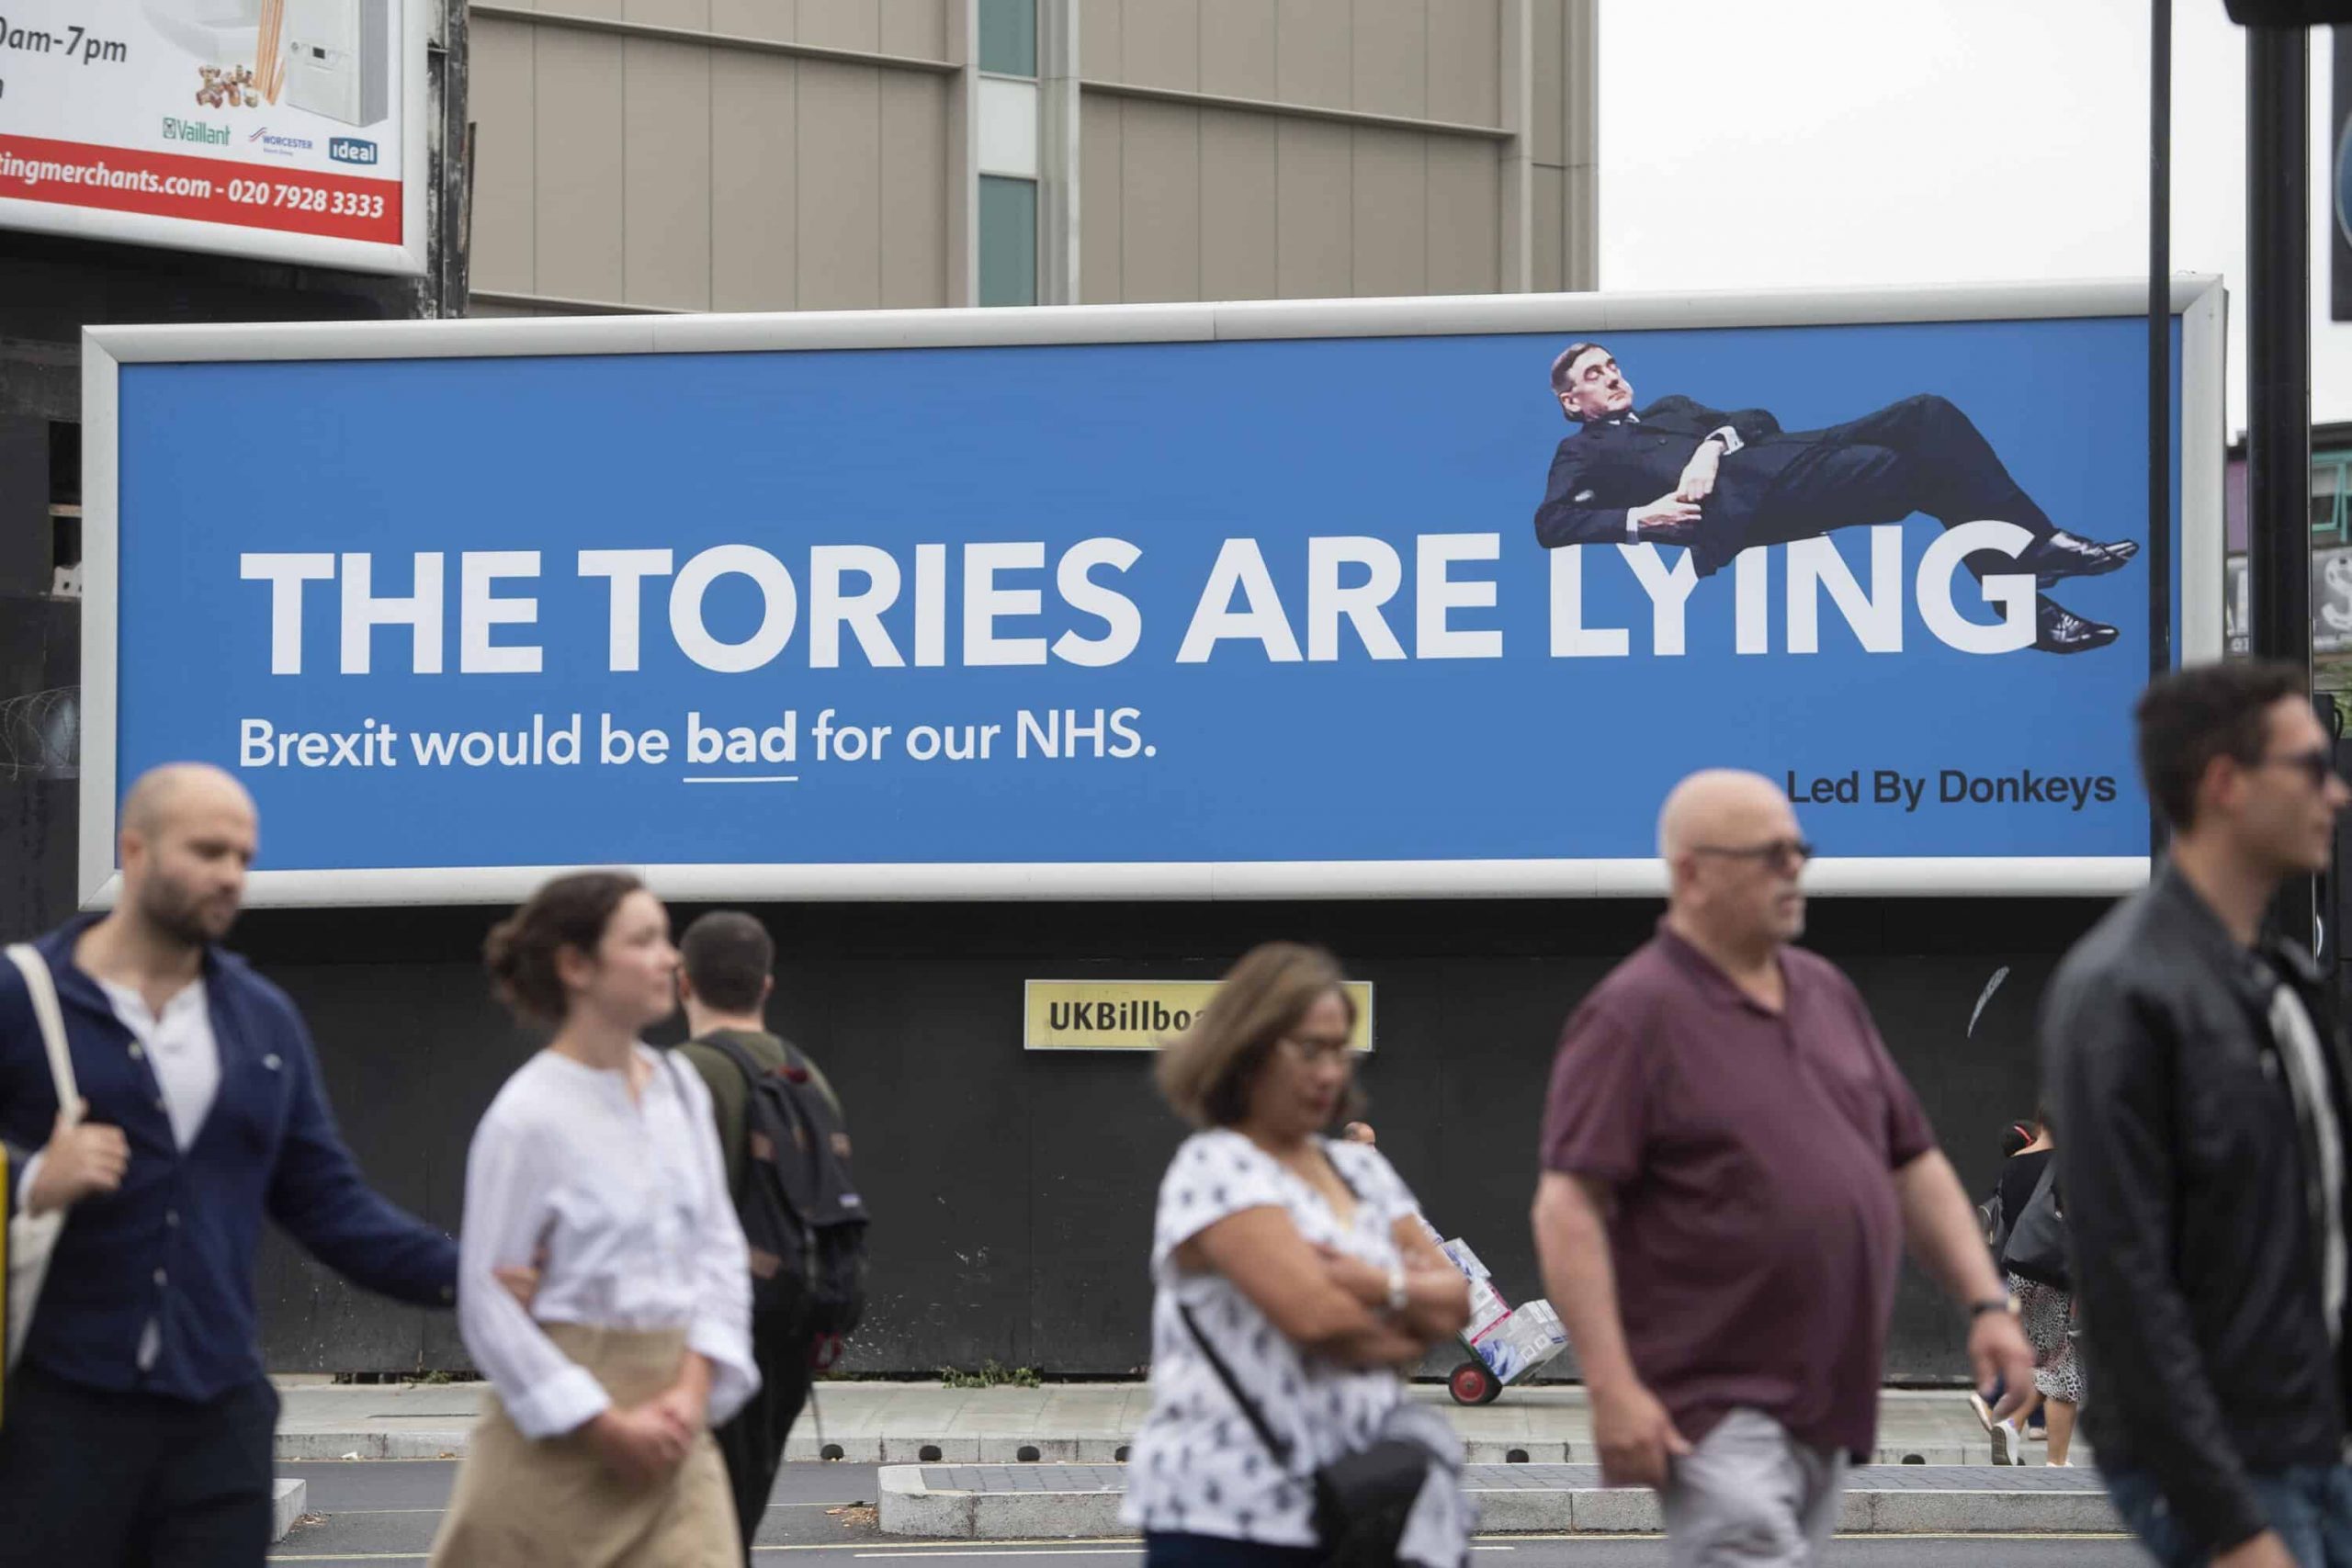 Reclining Jacob Rees-Mogg features on poster claiming Tories are lying about NHS